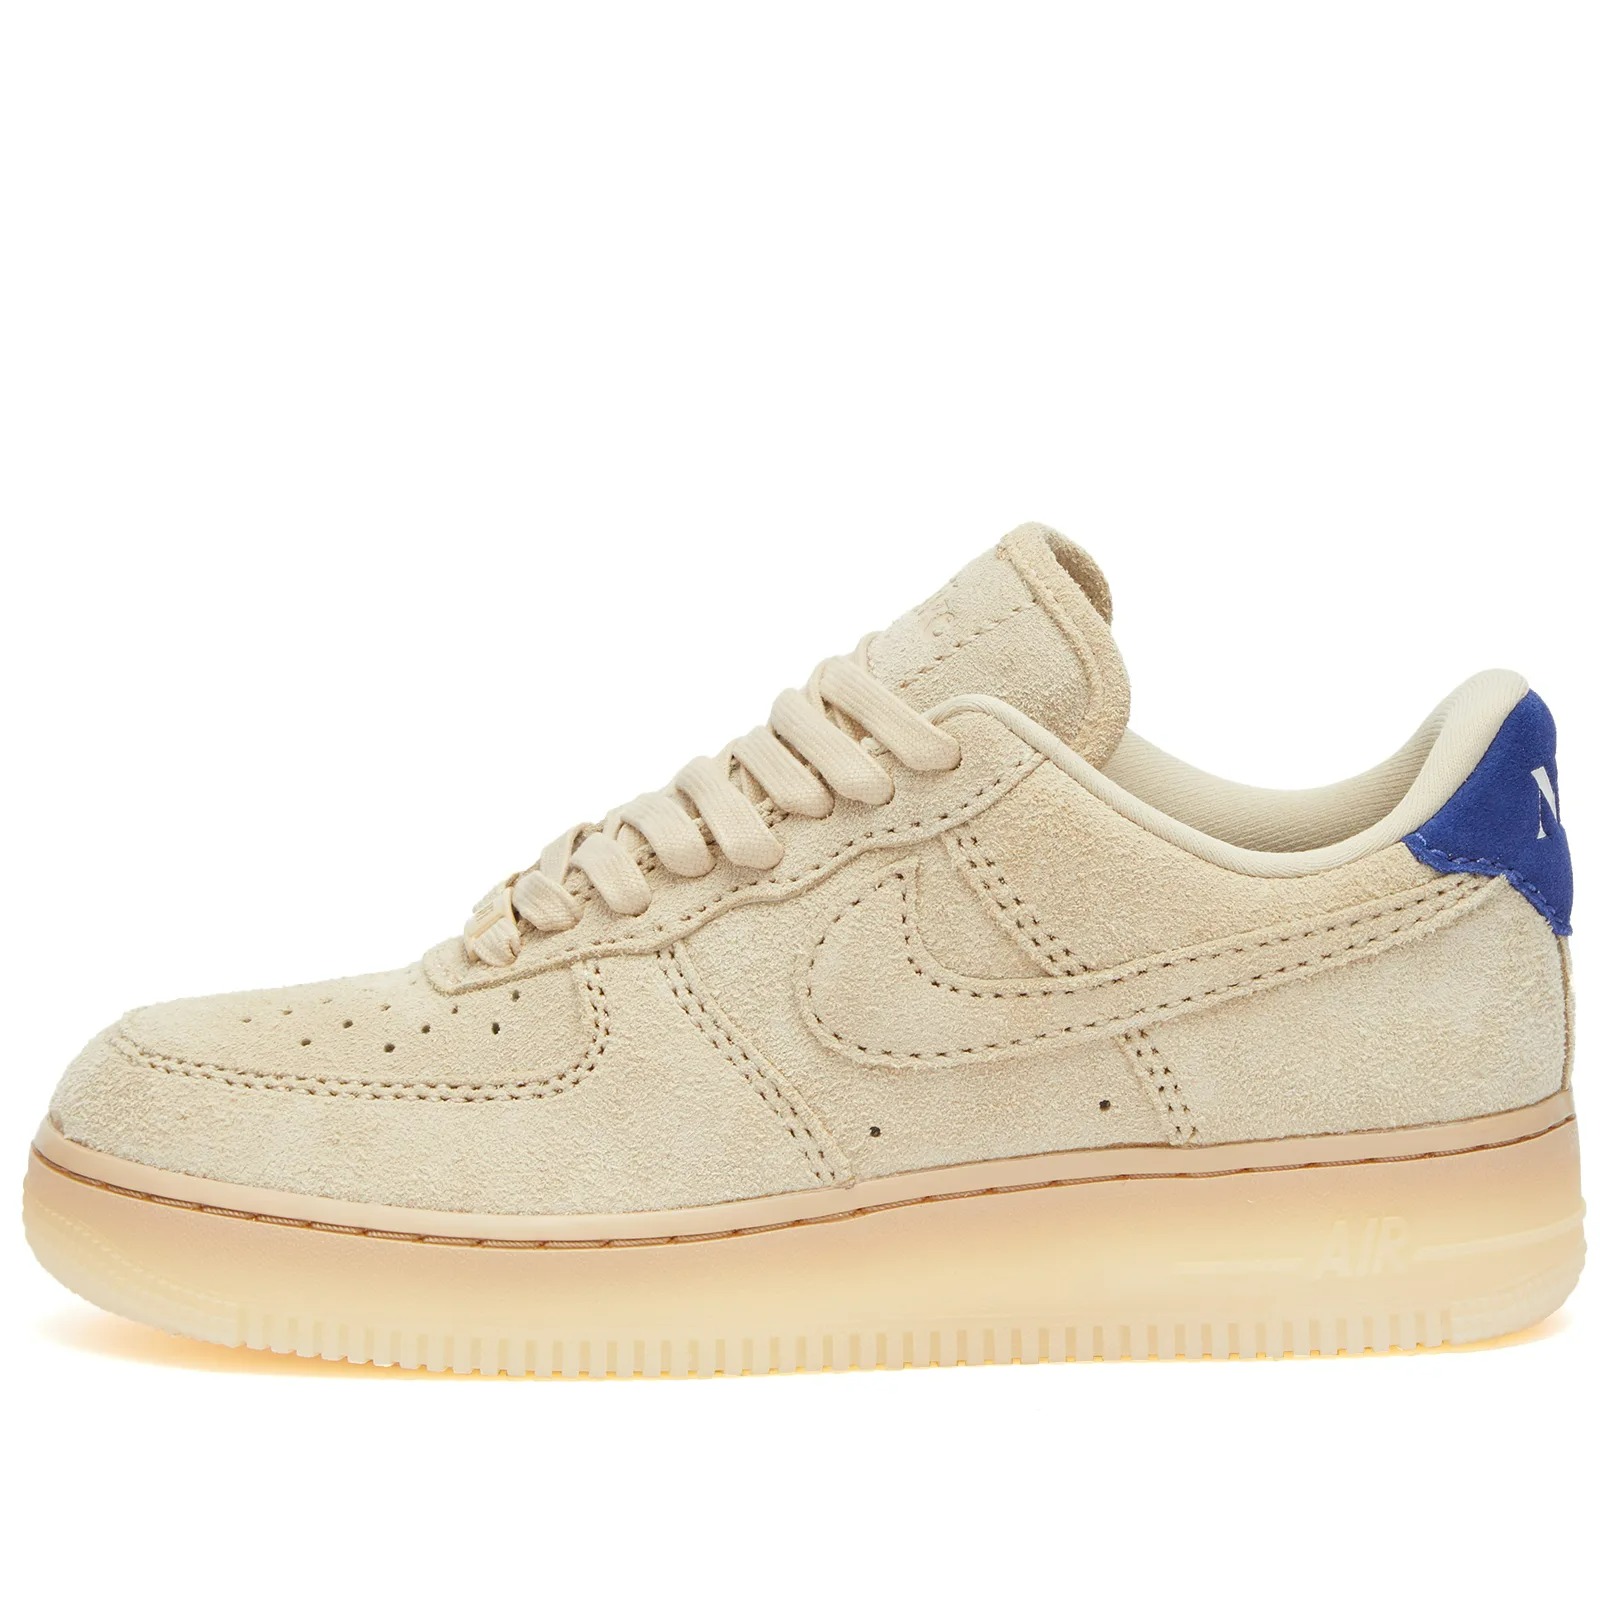 Кроссовки Nike Air Force 1 '07 Low W, бежевый/синий nike new arrival air force1 af1 breathable utility men running shoes low comfortable sneakers aj7747